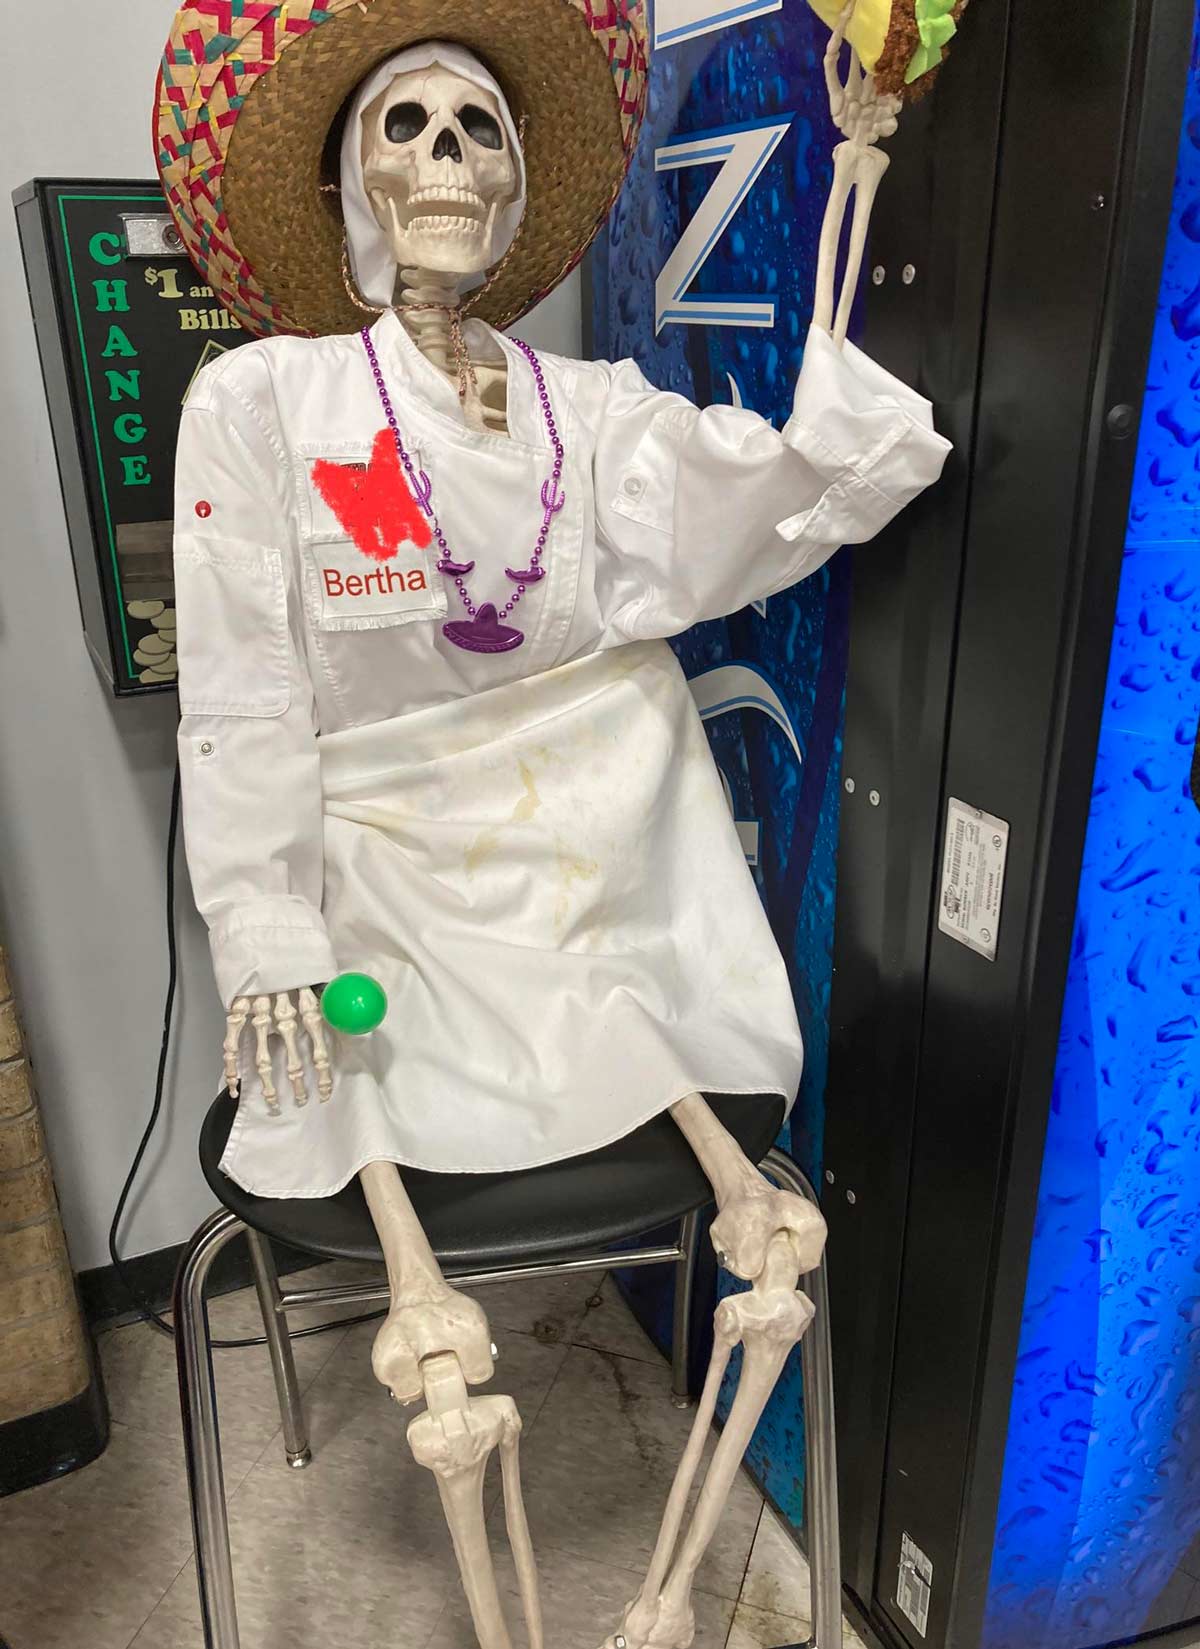 One of our lunch ladies passed and her staff set this skeleton up in her honor